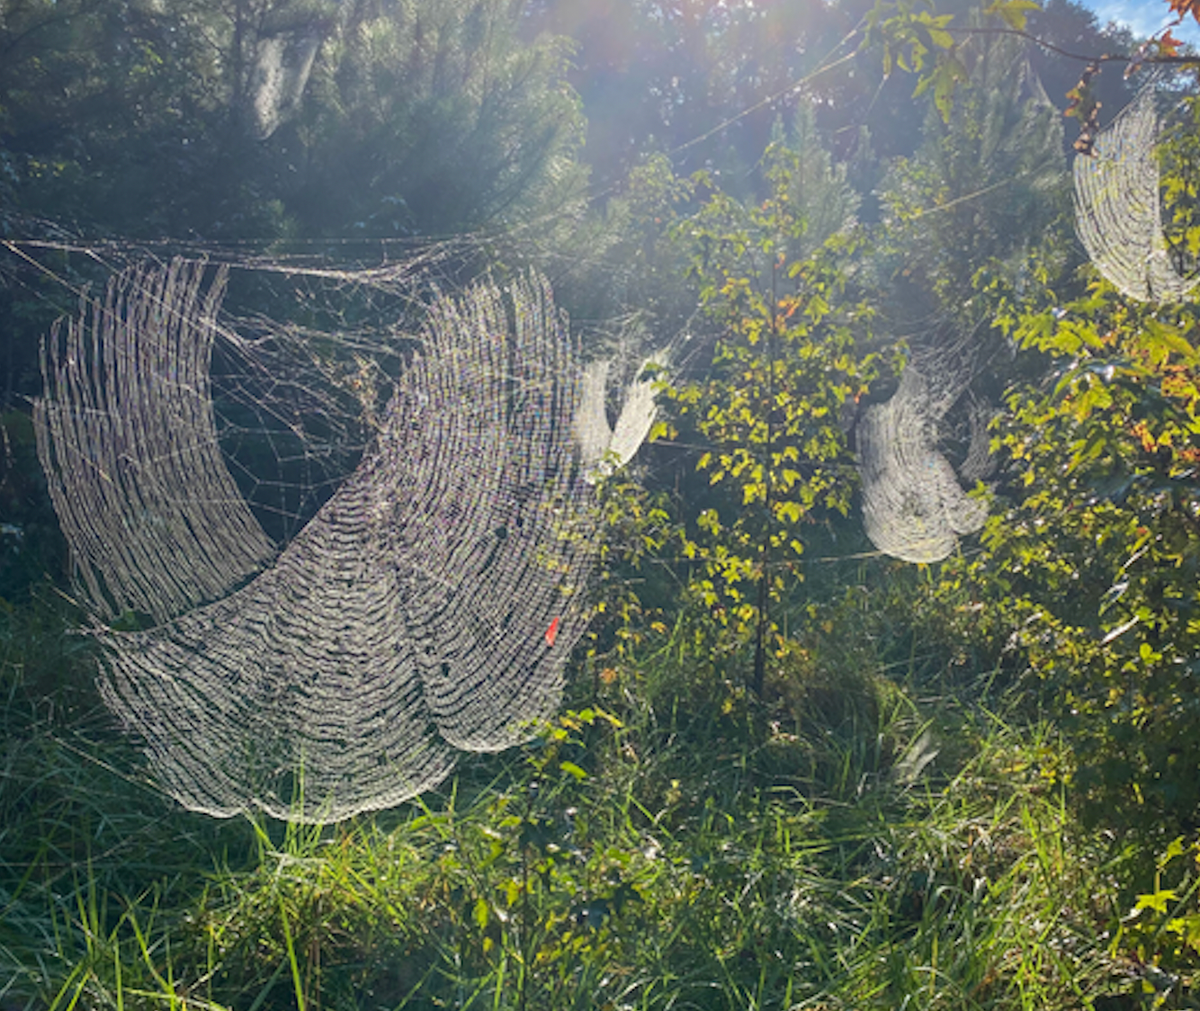 Study documents spider web so sturdy even birds can perch on them